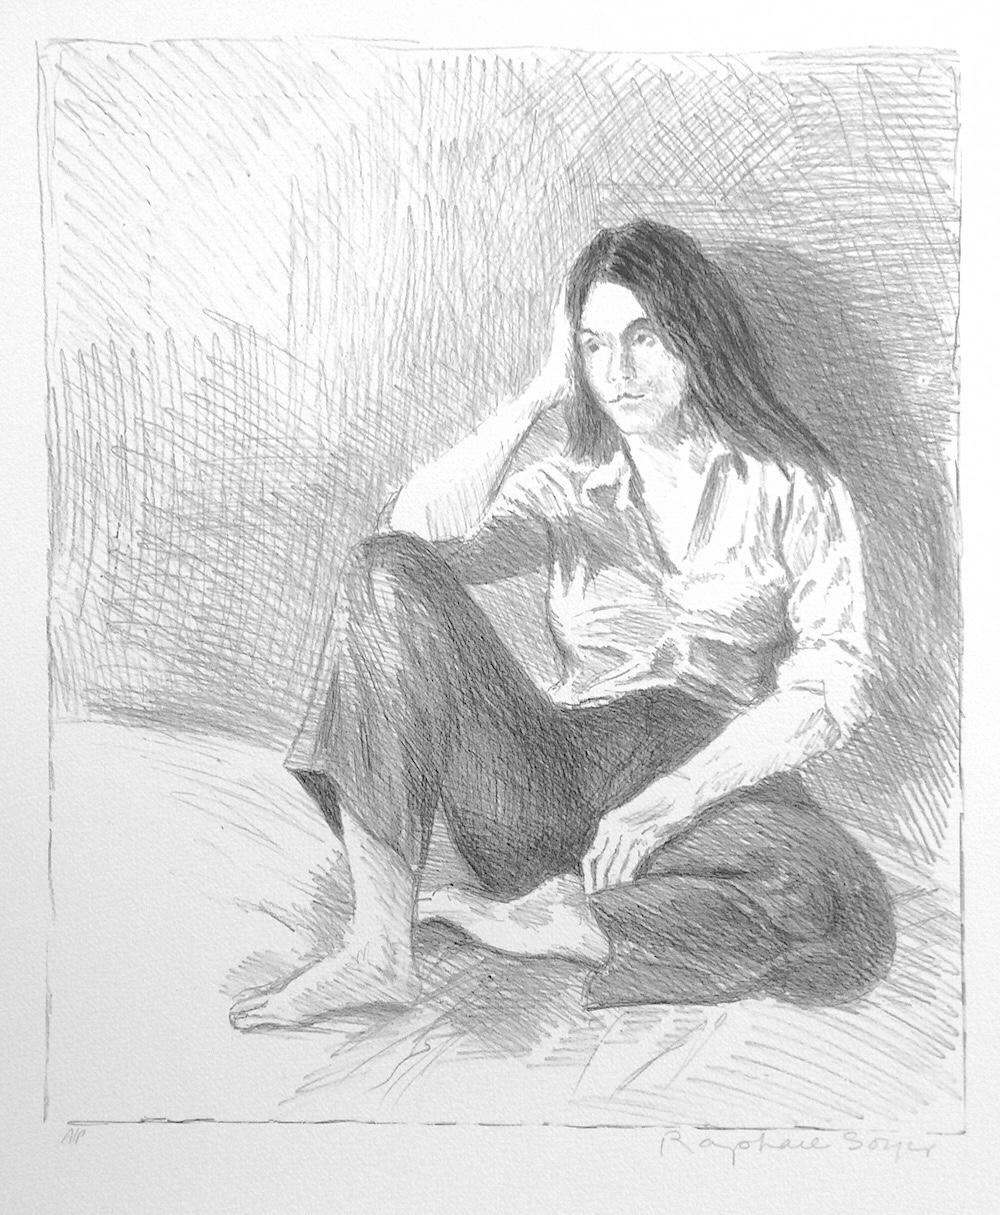 Raphael Soyer Figurative Print - SEATED WOMAN BLUE JEANS Signed Lithograph, Female Portrait, Long Hair, Bare Feet